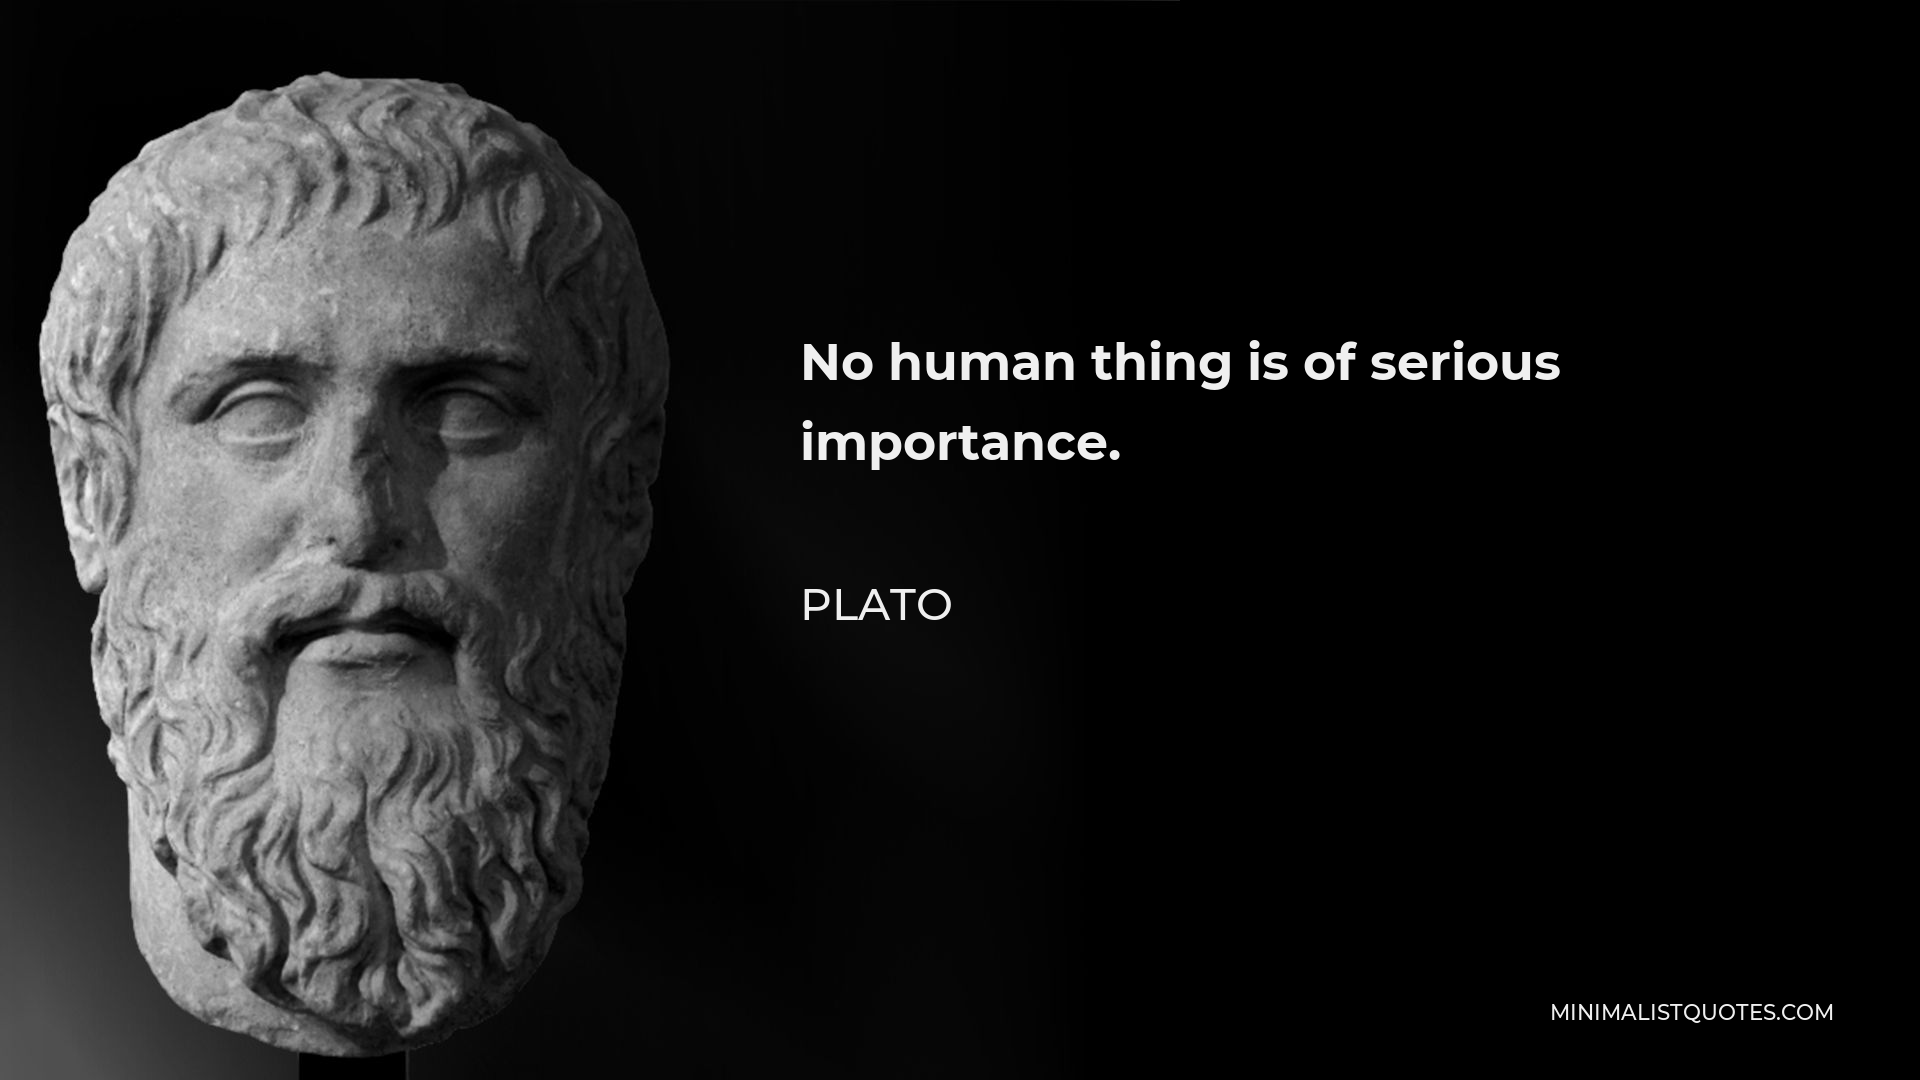 Plato Quote - No human thing is of serious importance.